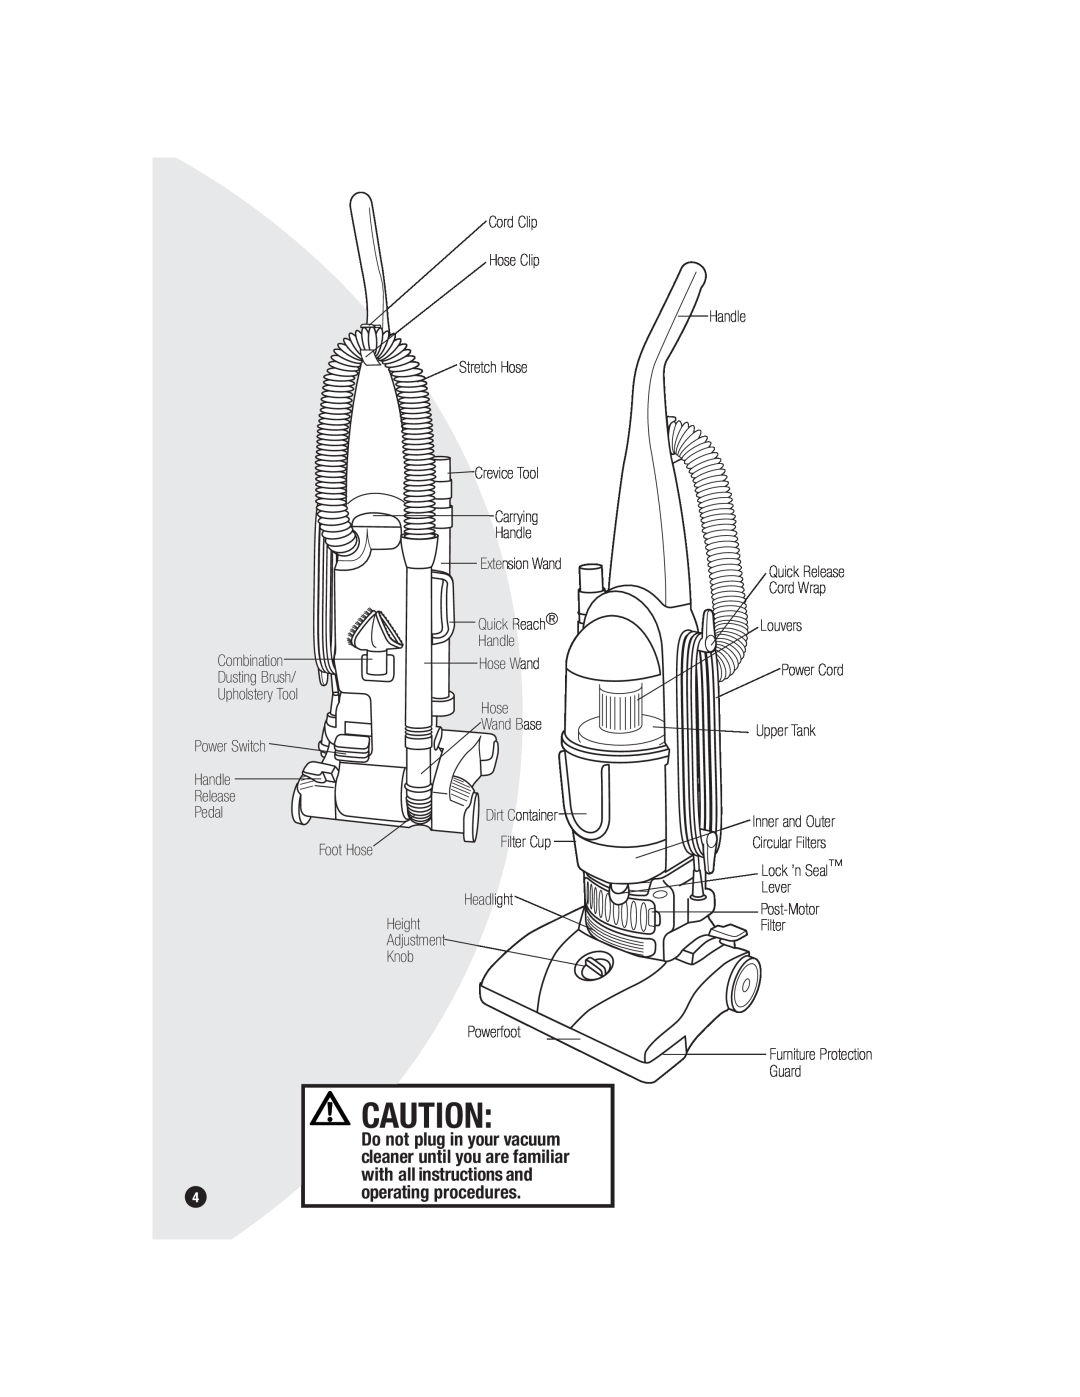 Bissell 6579 with all instructions and, operating procedures, Do not plug in your vacuum, cleaner until you are familiar 